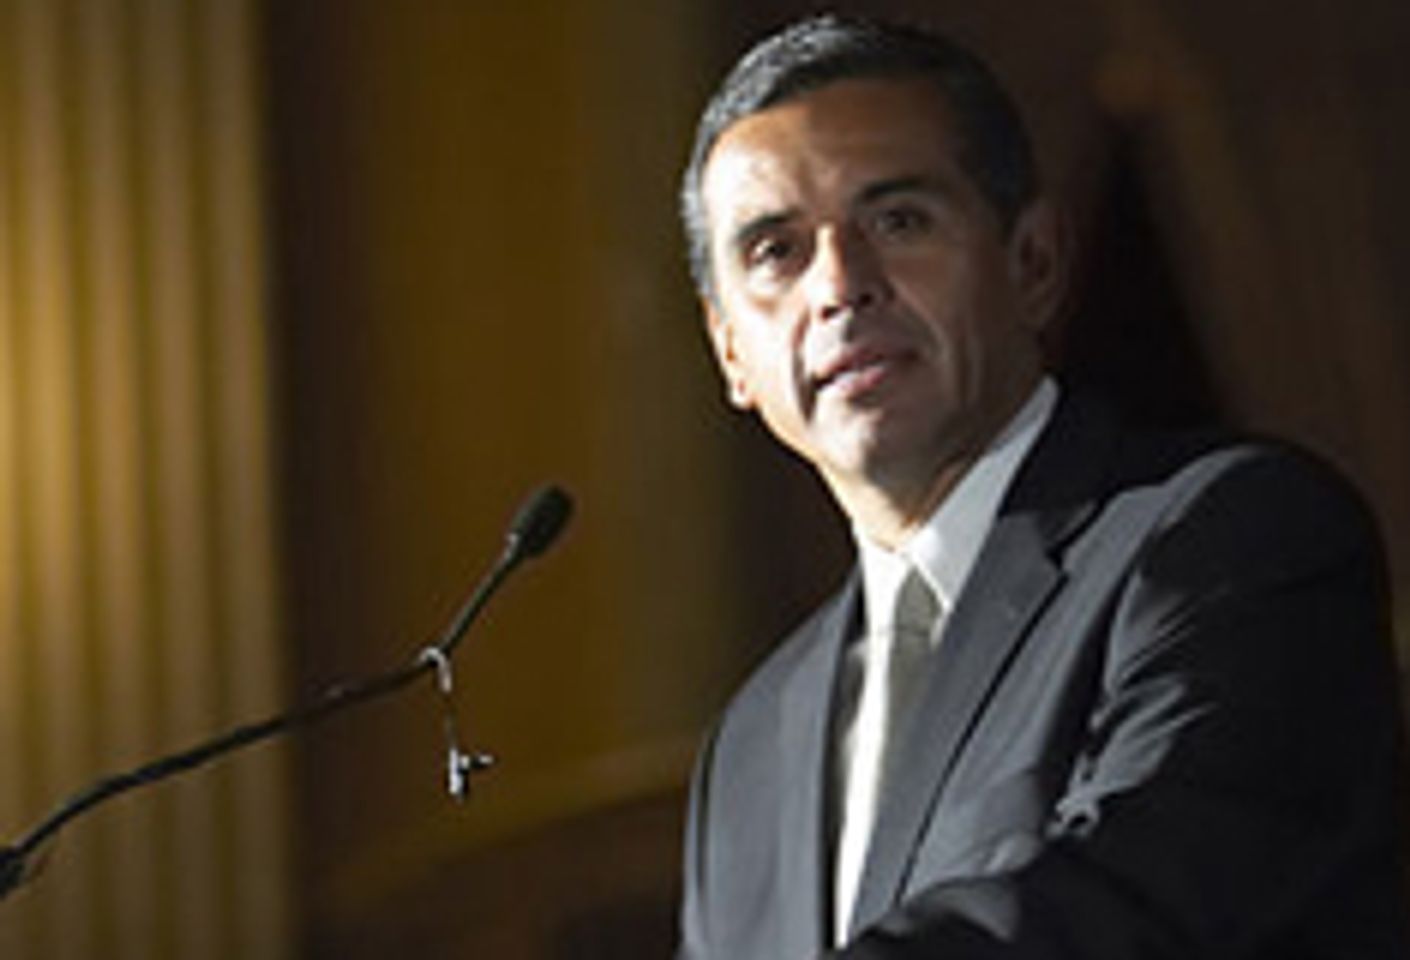 L.A. Mayor Honors ASACP for 'RTA' Website Label